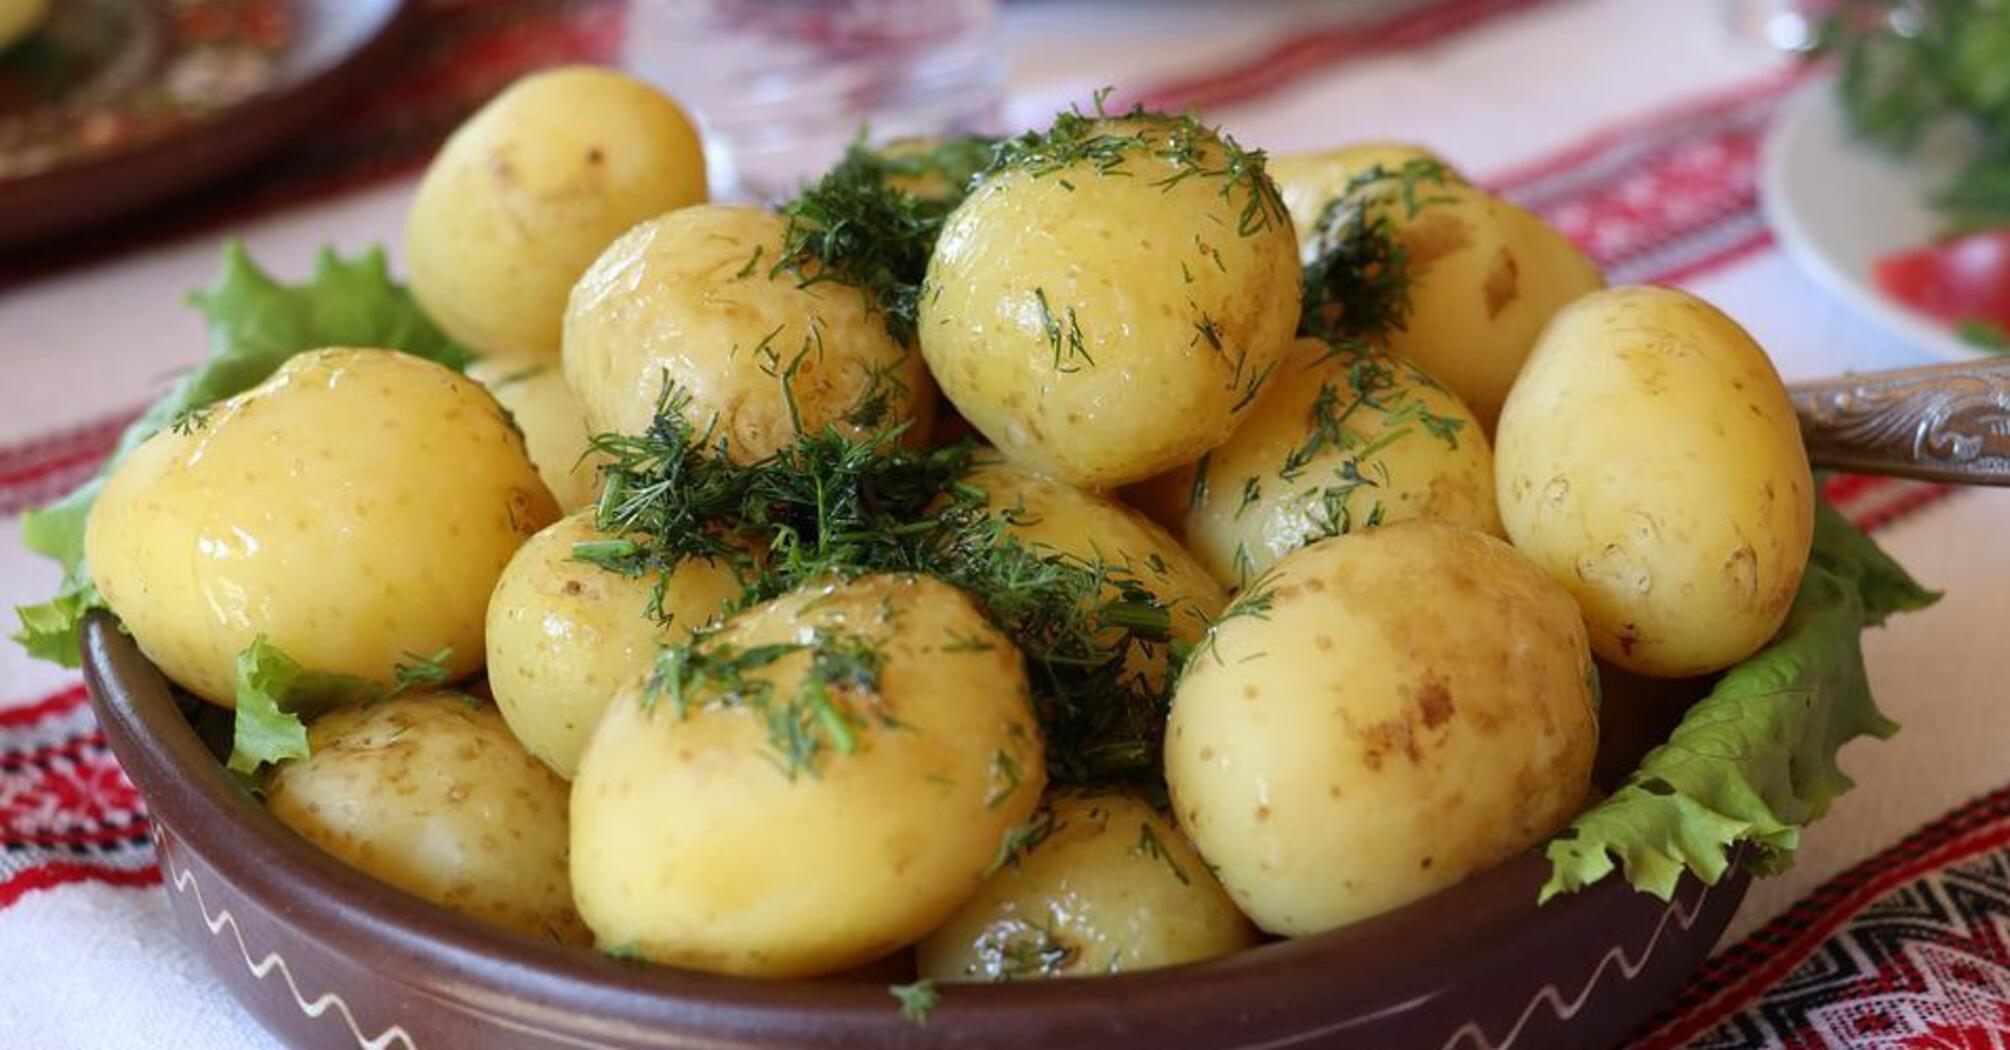 How to serve new potatoes deliciously: an idea for simple and low-fat frying